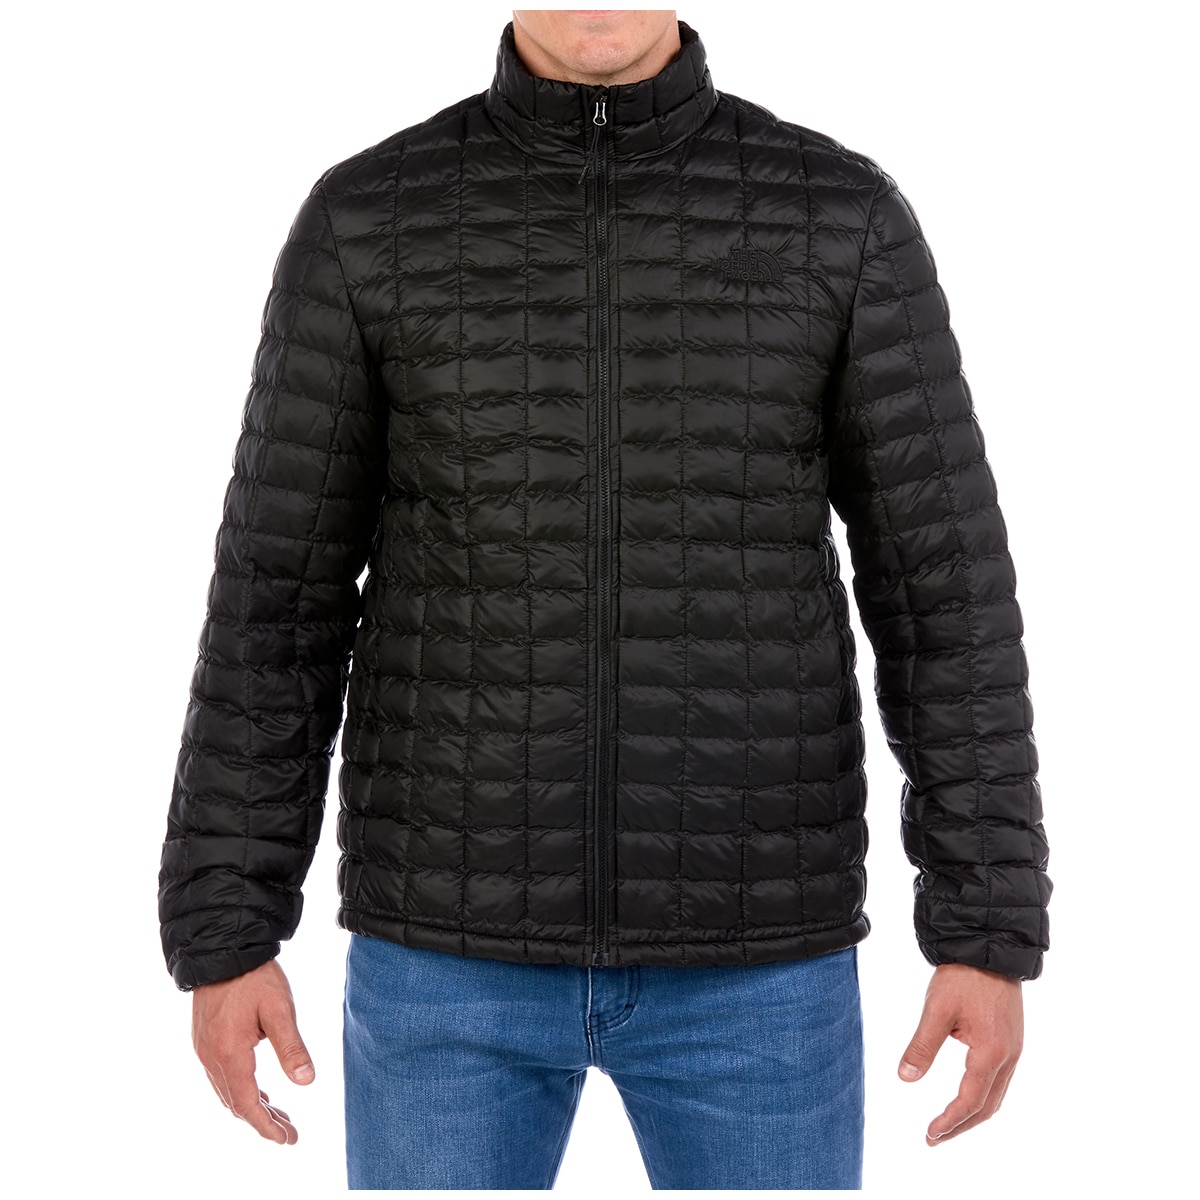 North Face Men's Thermoball Eco Jacket 